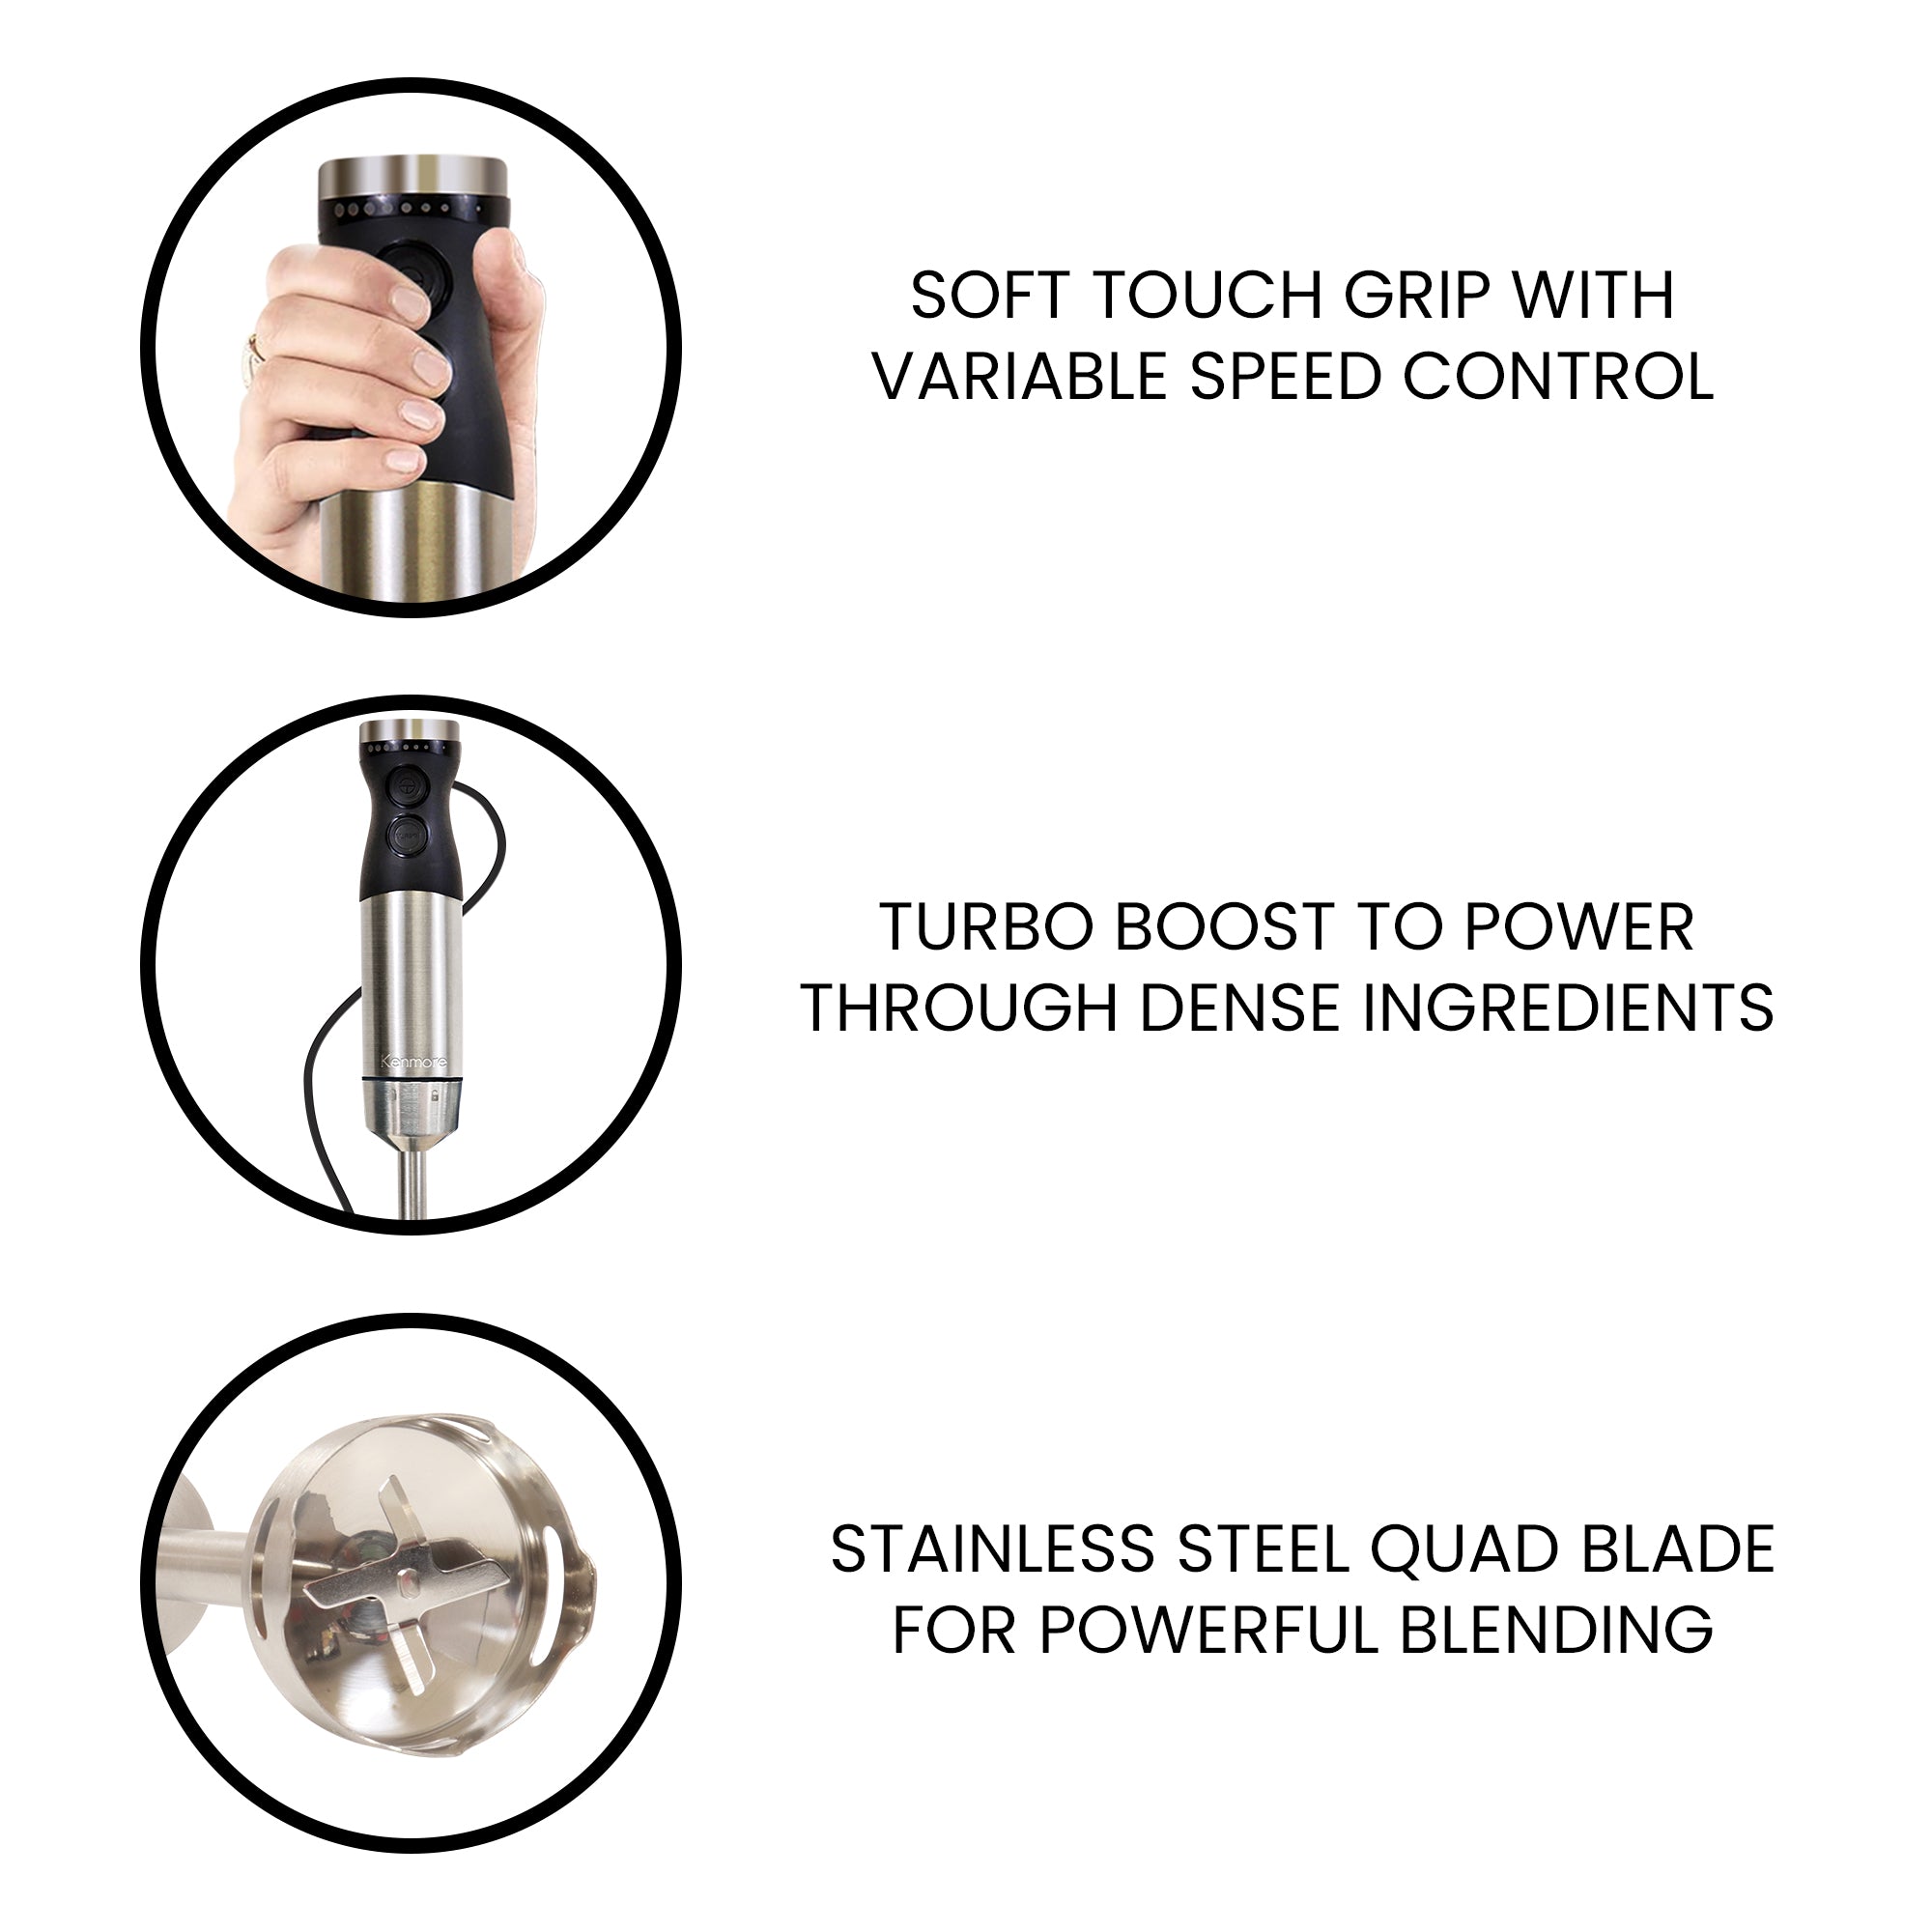 Three closeup images show features: 1. Soft touch grip with variable speed control; 2. Turbo boost to power through dense ingredients; 3. Stainless steel quad blade for powerful blending